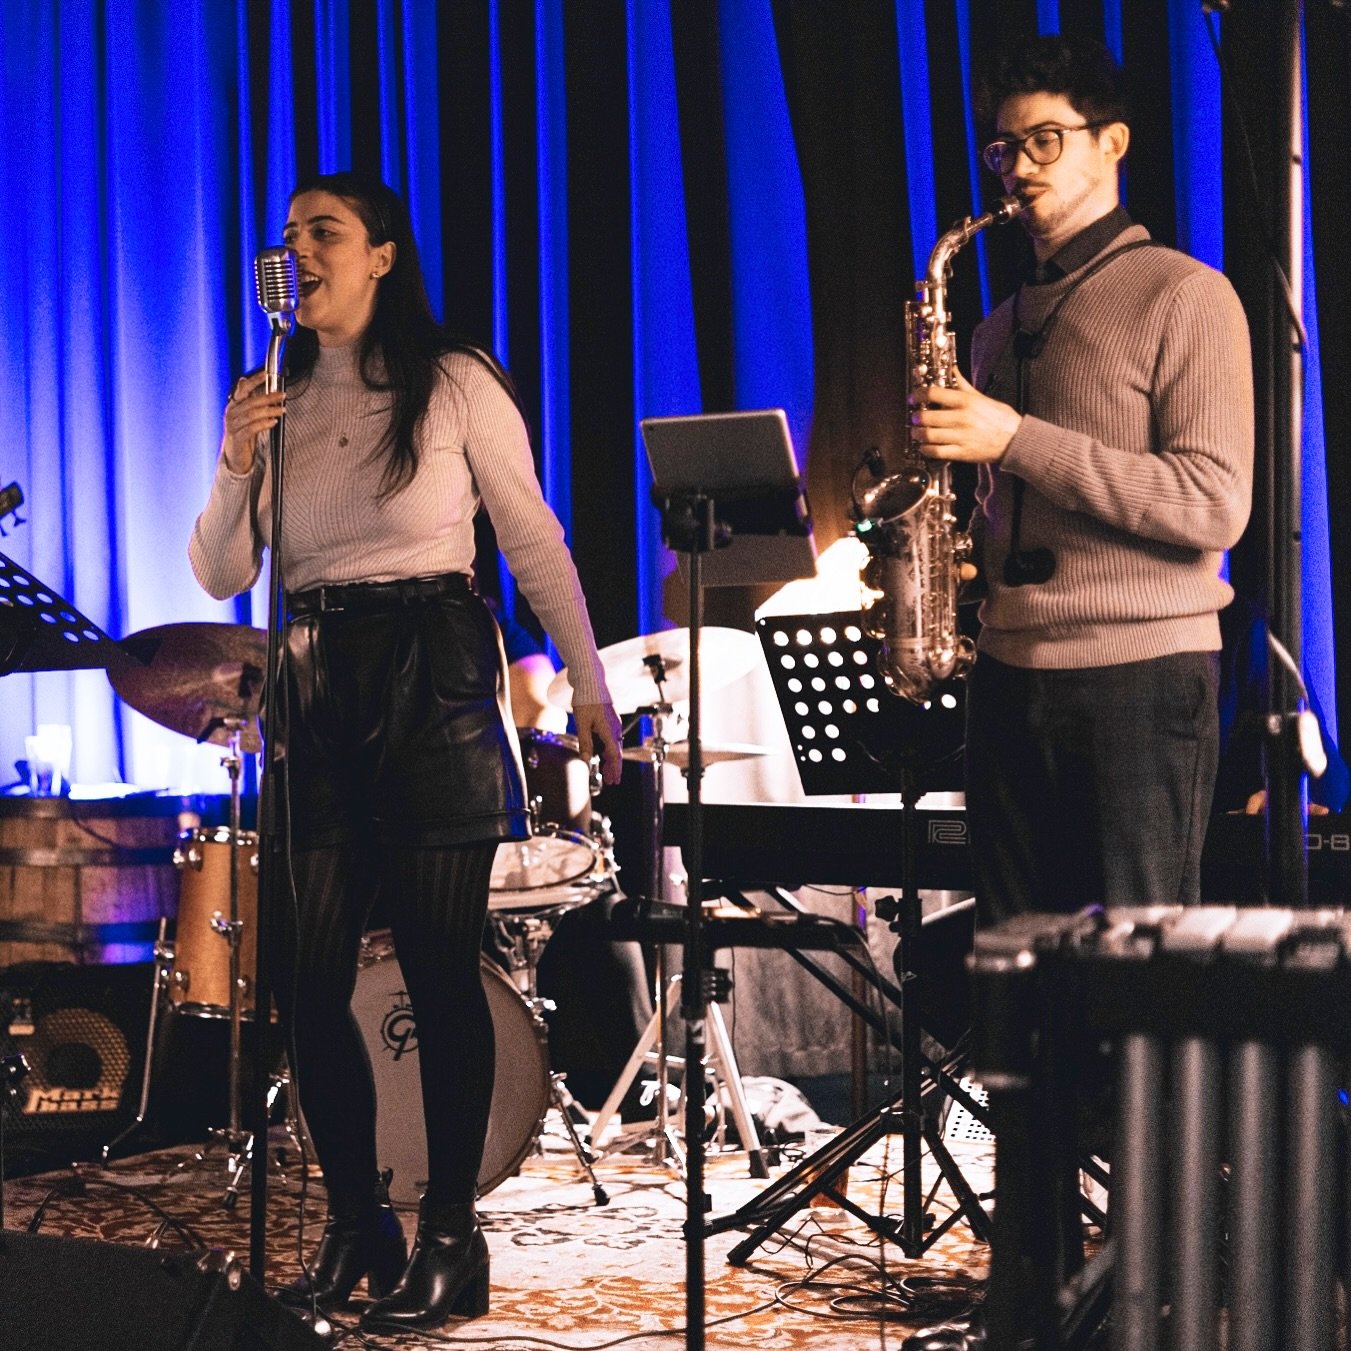 Join us for another delightful evening of Jazz Night at the Brewery! 🎶

@chcjazz is back at the brewery on Sunday, May 26th from 6-9PM with some silky-smooth live jazz!

Our taproom and kitchen will be open LATE to satisfy your cravings while enjoyi